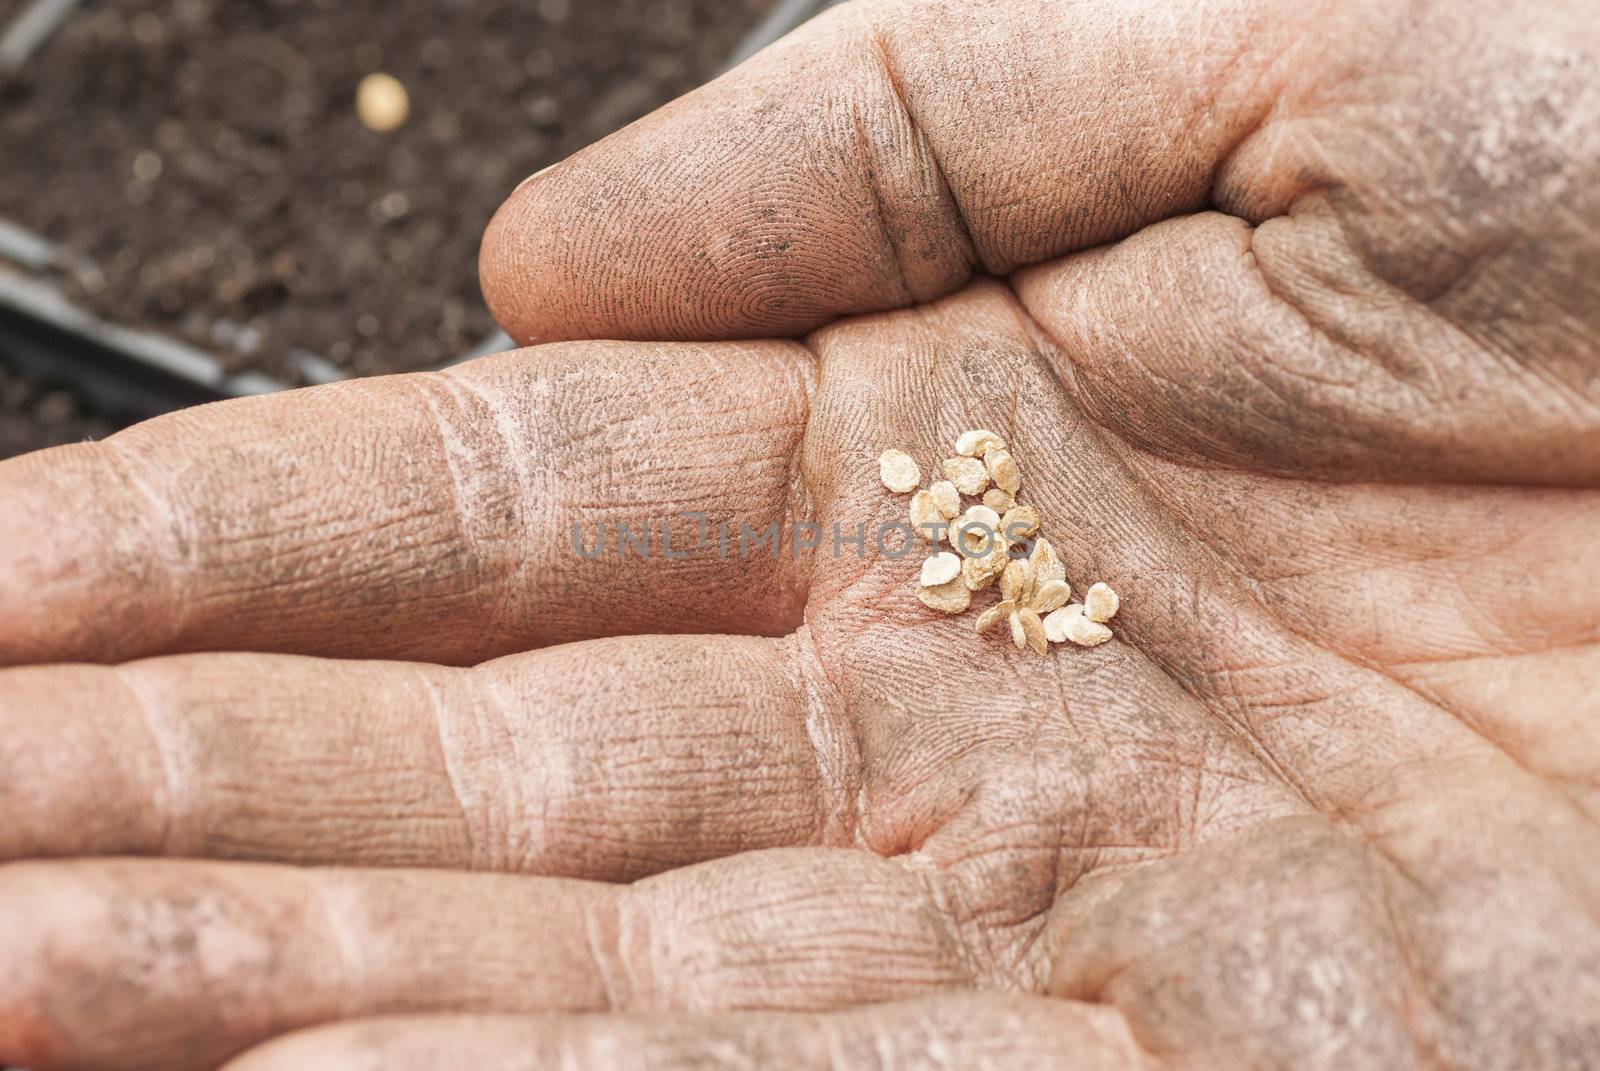 Sowing Tomato Seeds into Soil. by swellphotography